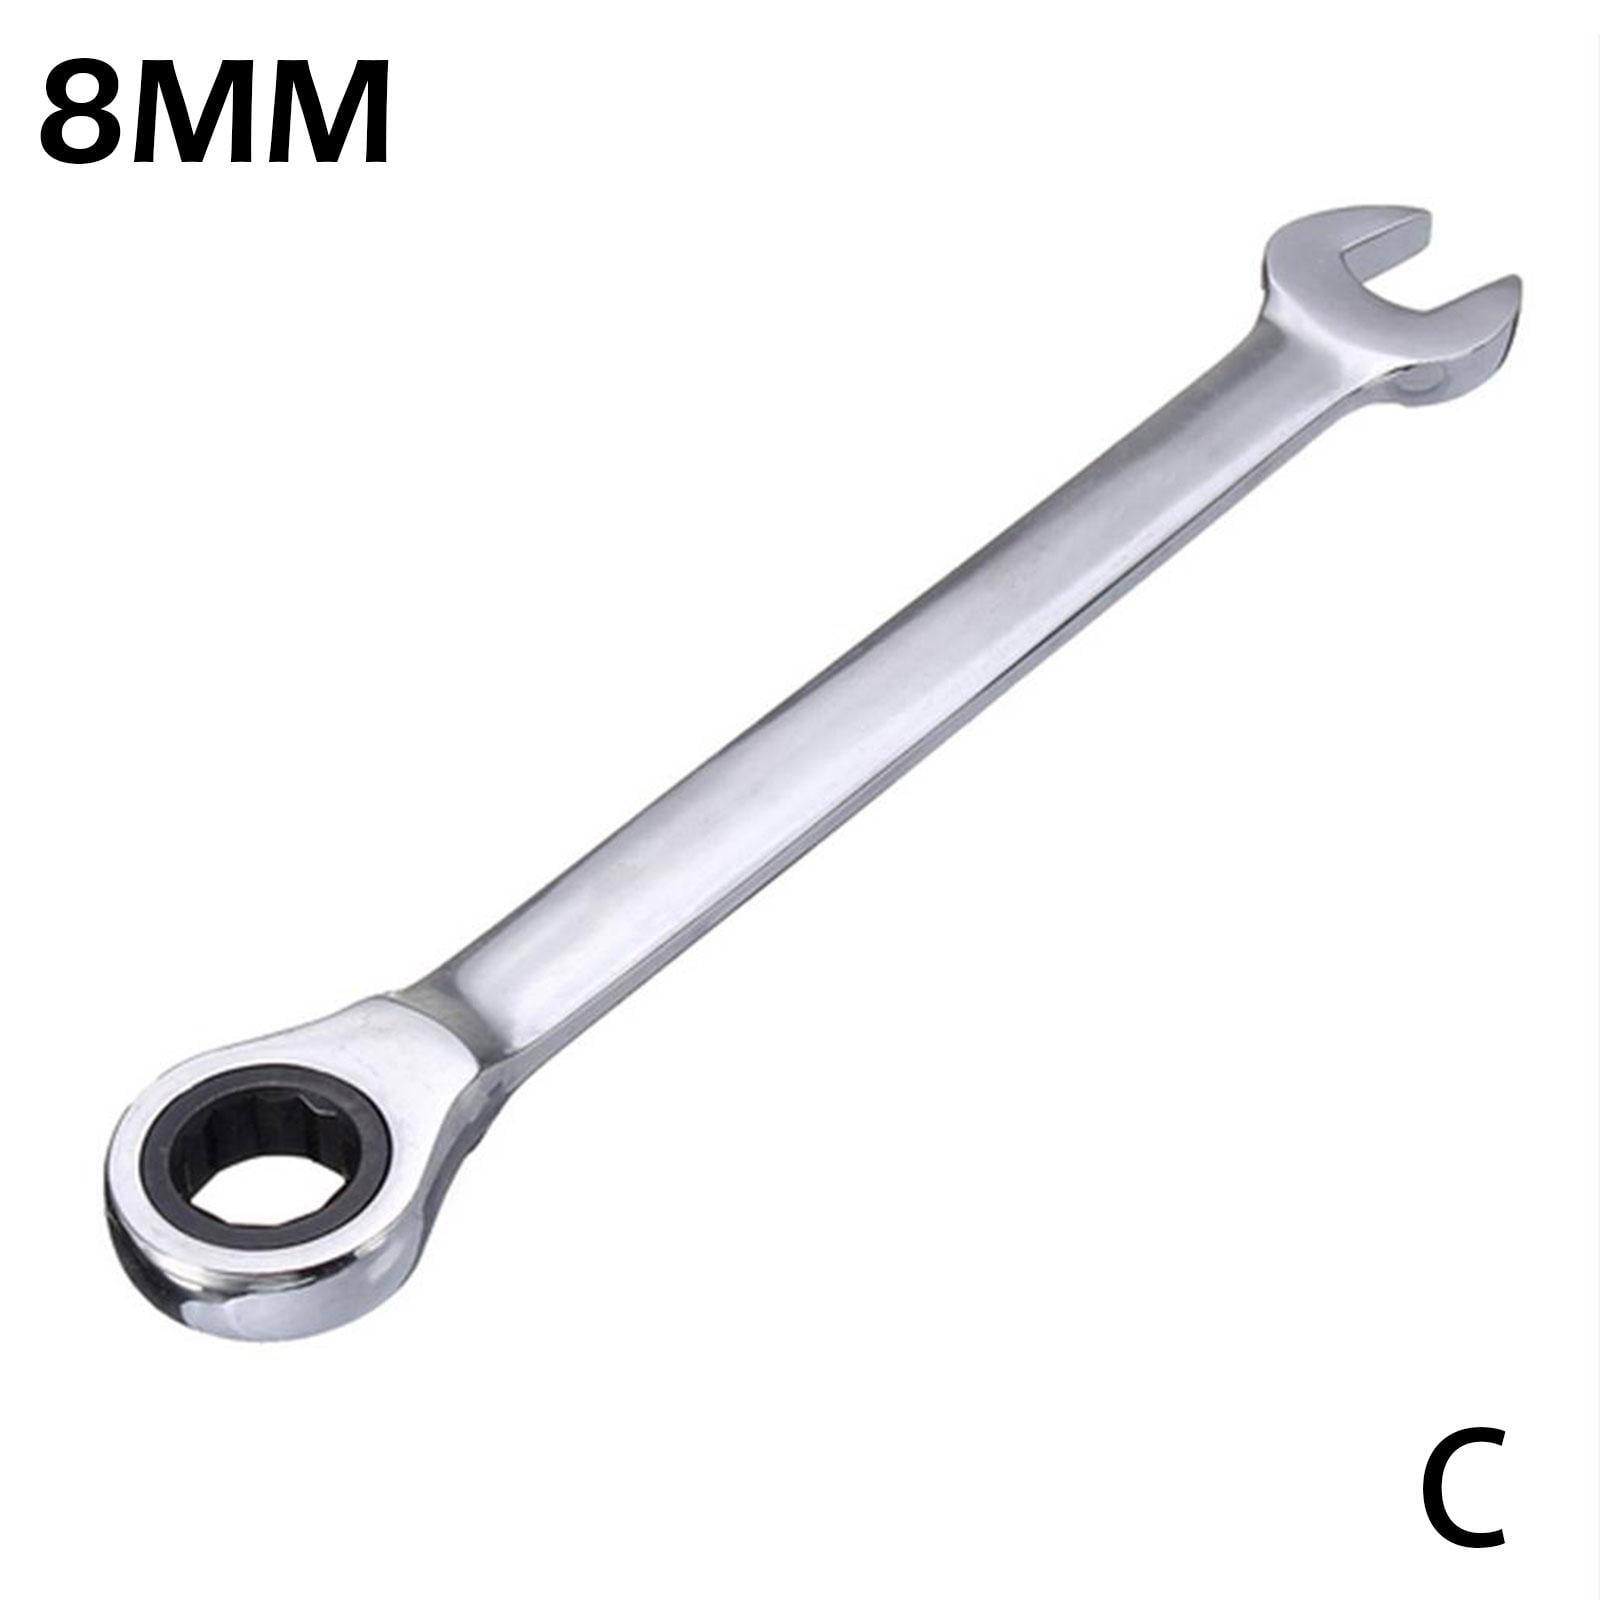 NYTRYD Wrench Ring Spanner,Adjustable Universal Torx Wrench Multi  Functional Flexible Type Pocket Wrench Drop 5-11mm&11-15mm,  5-15mm-15-27mm,Universal Auto Repair Tools 2 Pcs : Amazon.in: Home  Improvement